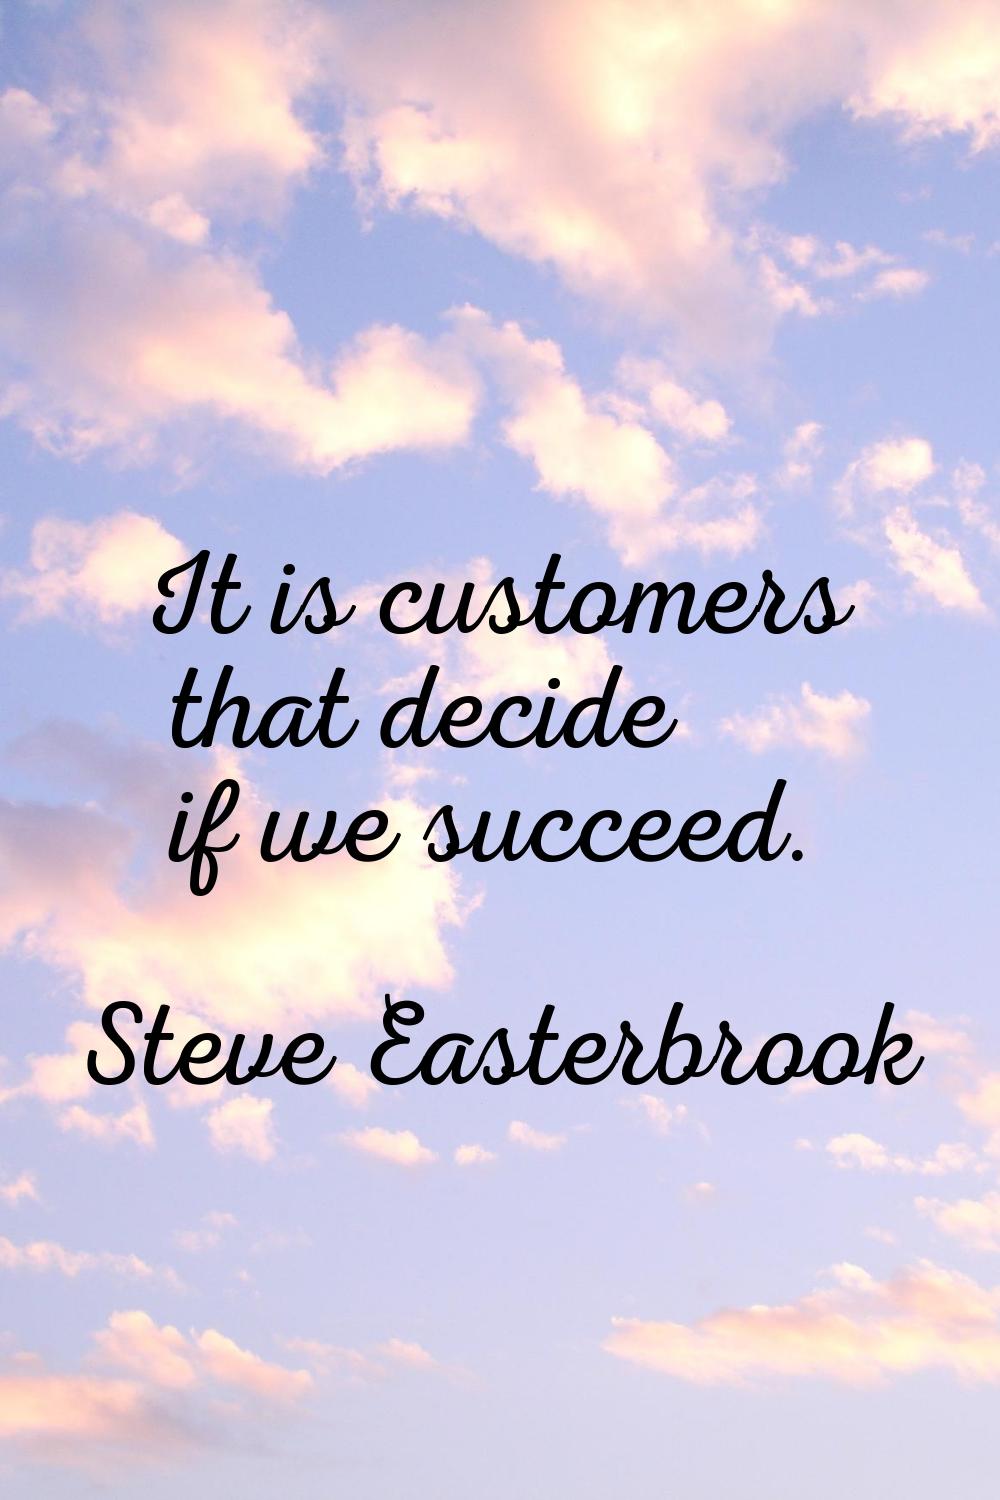 It is customers that decide if we succeed.